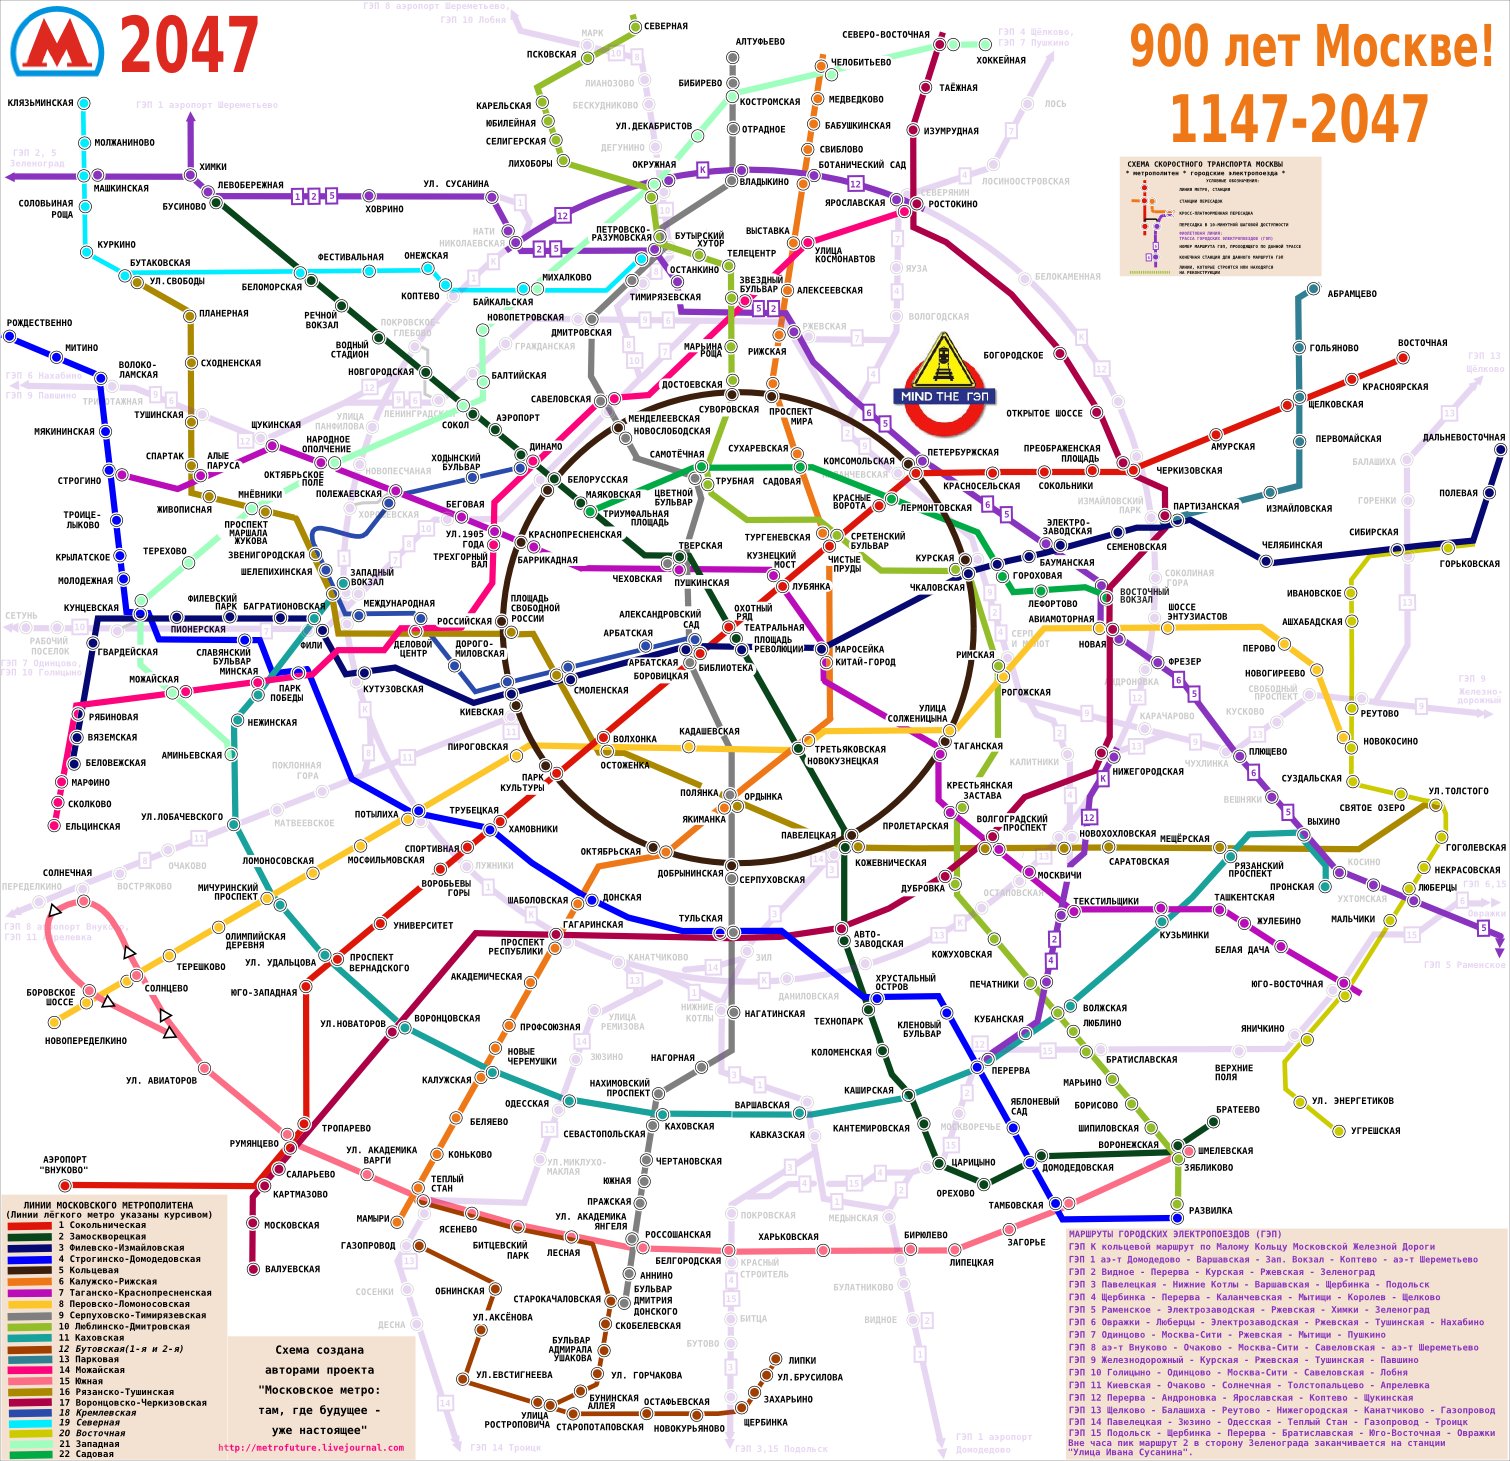 Moscow Metro in 2047.